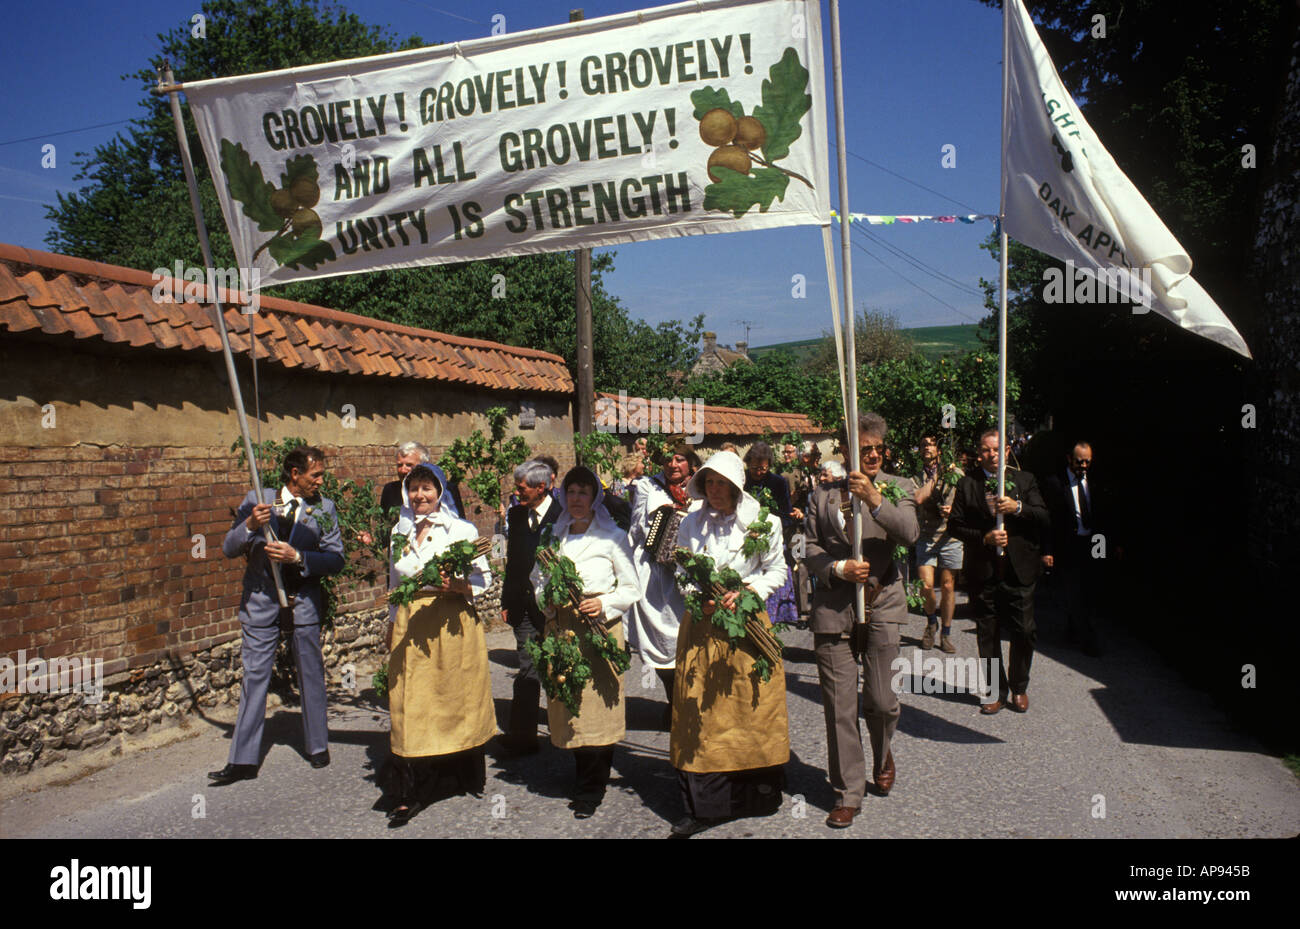 Grovely Forest Rights Great Wishford or Wishford Magna, Wiltshire Annual village event upholding Commoners ancient rights 1980s UK HOMER SYKES Stock Photo